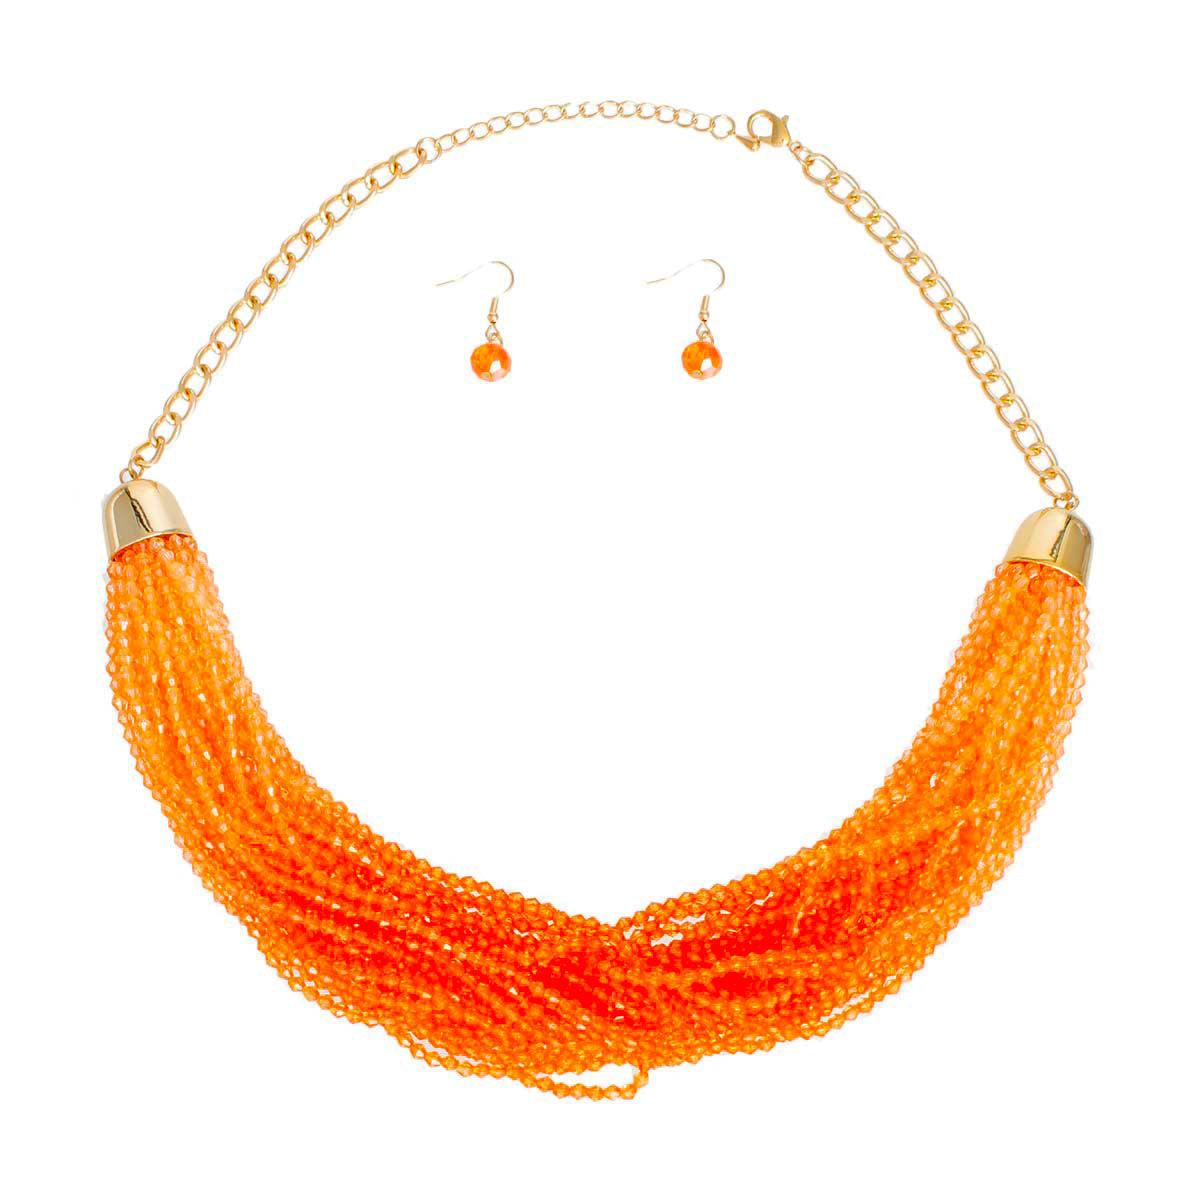 Orange Bead Multi Strand Necklace with Earrings